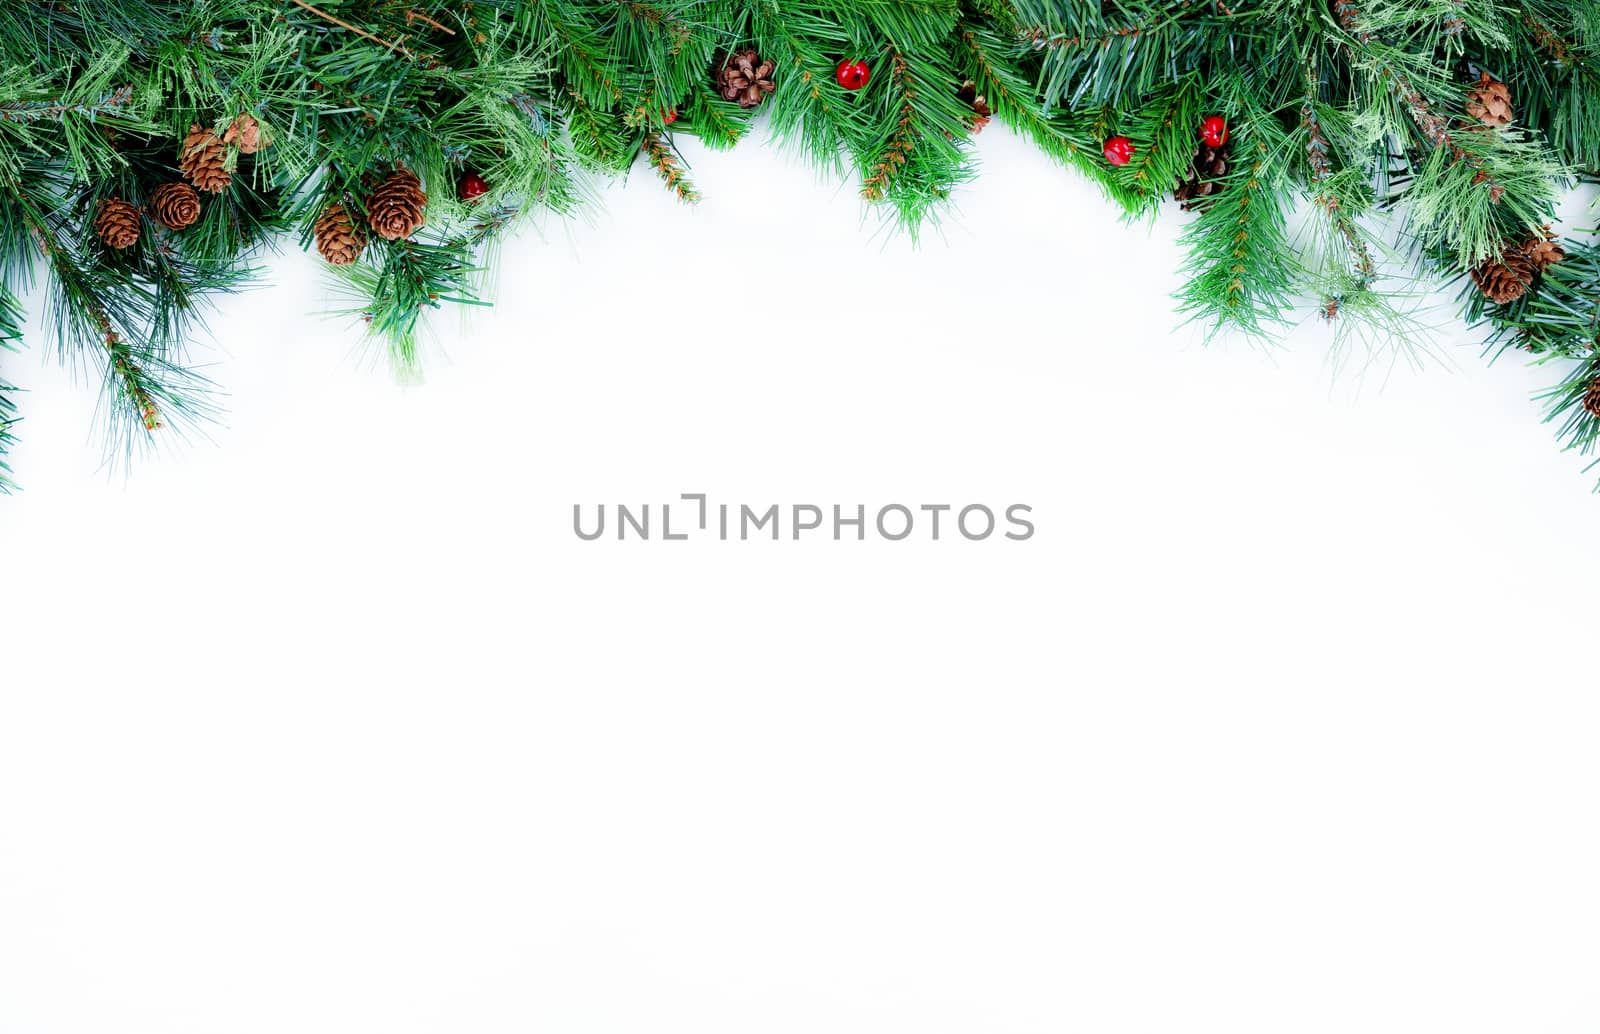 Top Border of Christmas tree evergreen branches on a white backg by tab1962